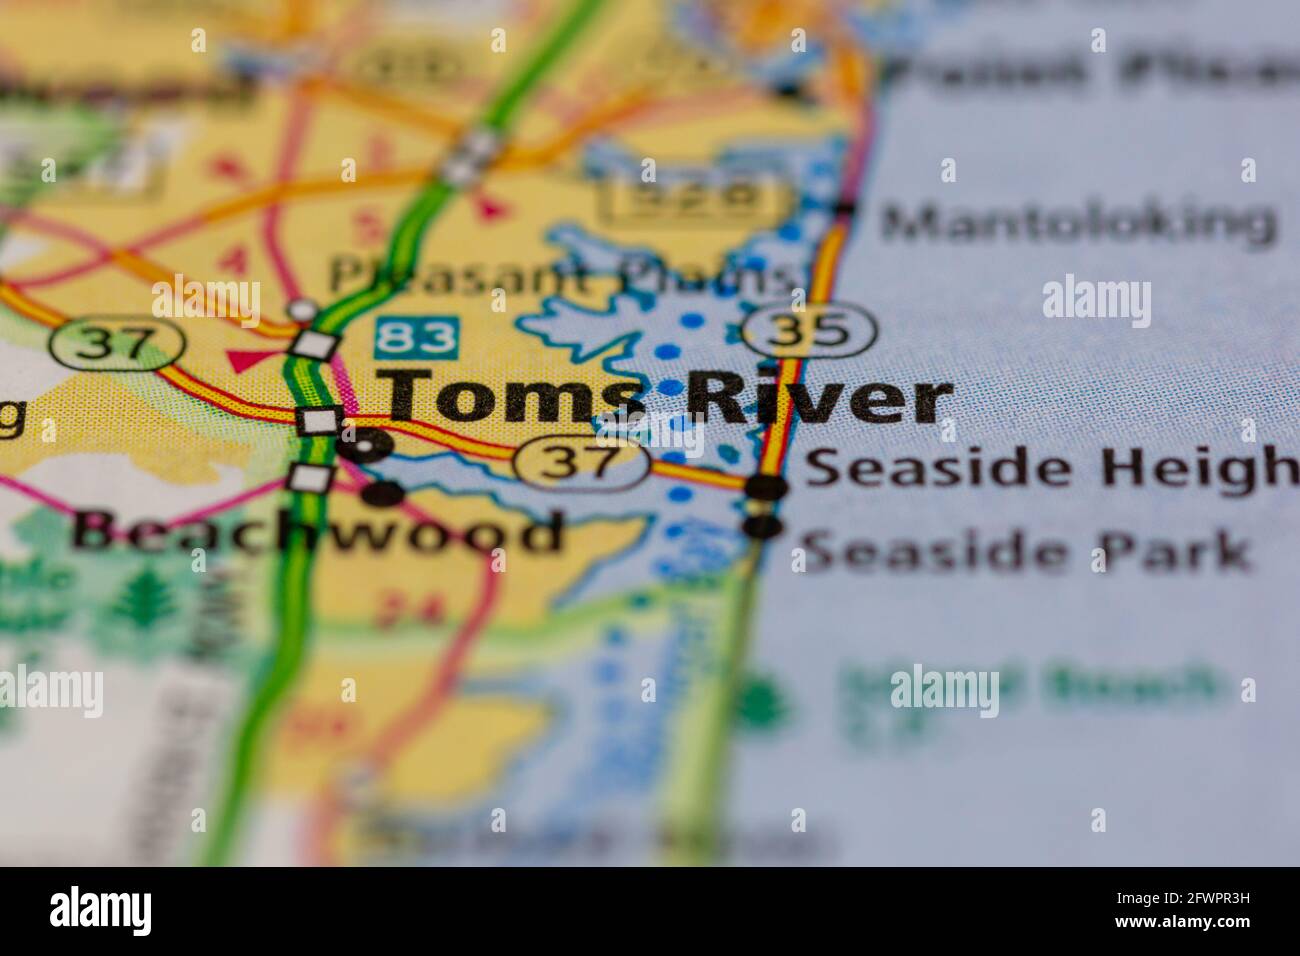 Toms River New Jersey USA shown on a Geography map or road map Stock Photo  - Alamy